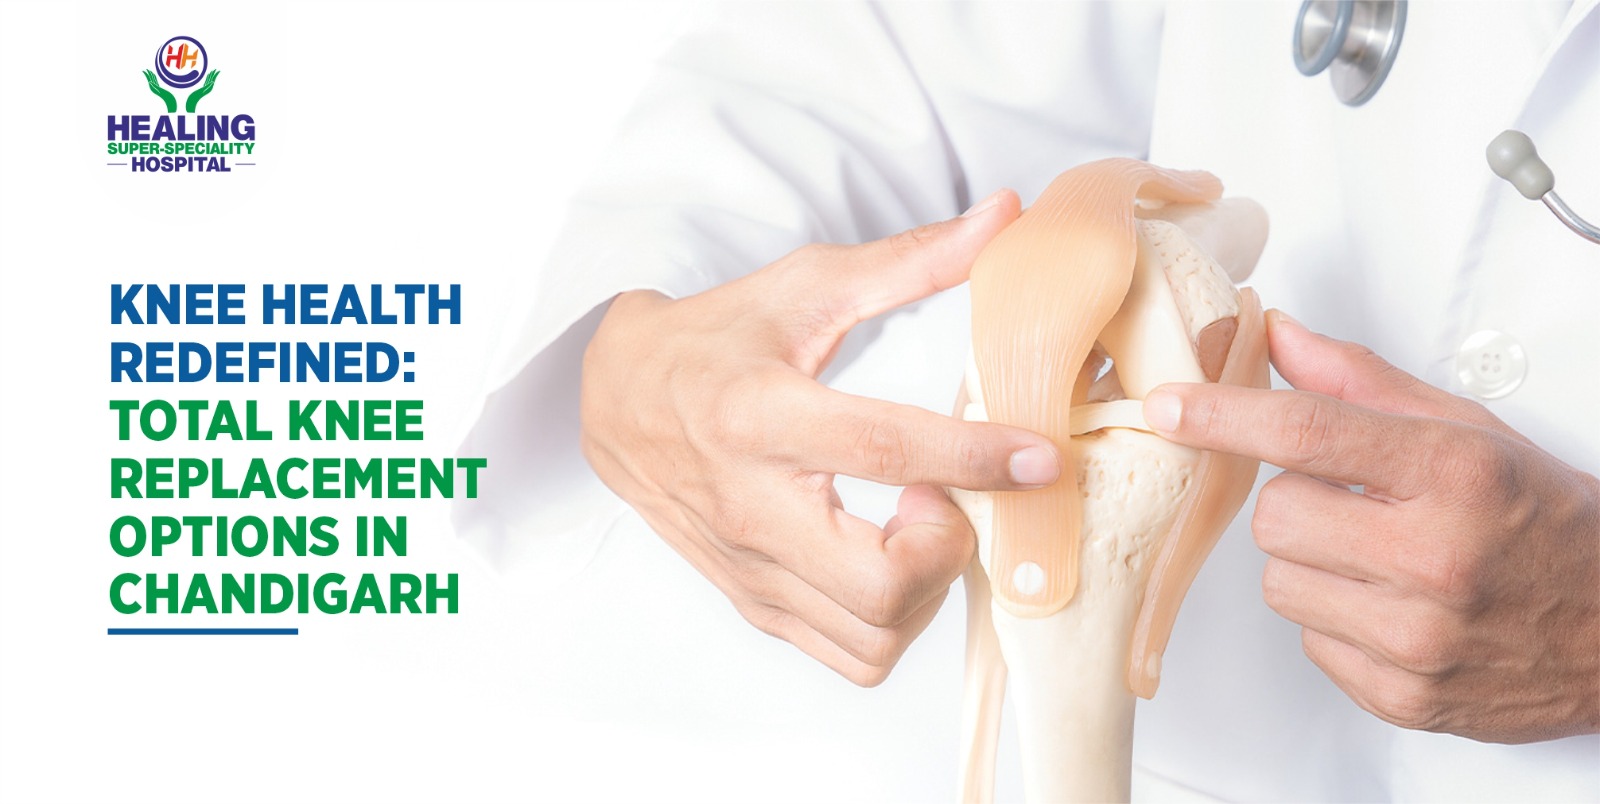 Knee Health Redefined: Total Knee Replacement Options in Chandigarh